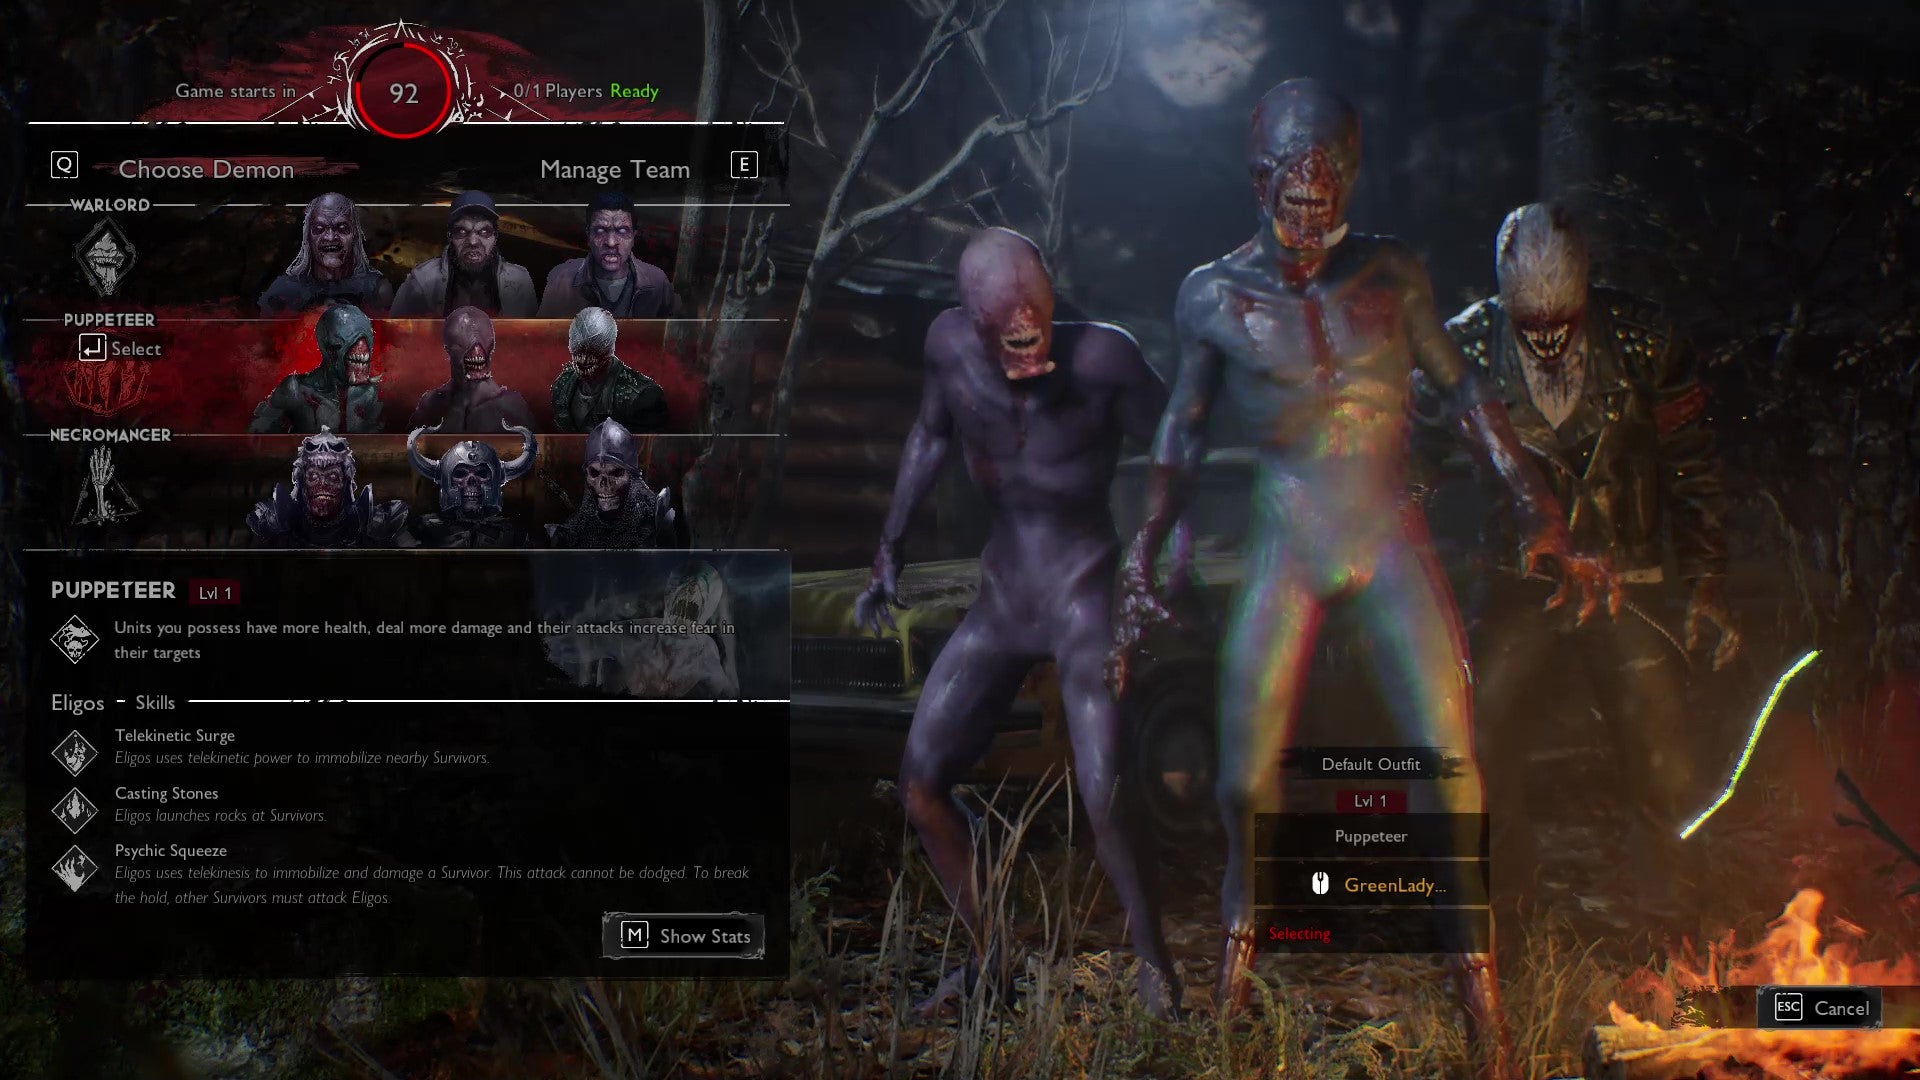 The player selection screen from Evil Dead: The Game, with the Puppeteer selected by a Demon player.